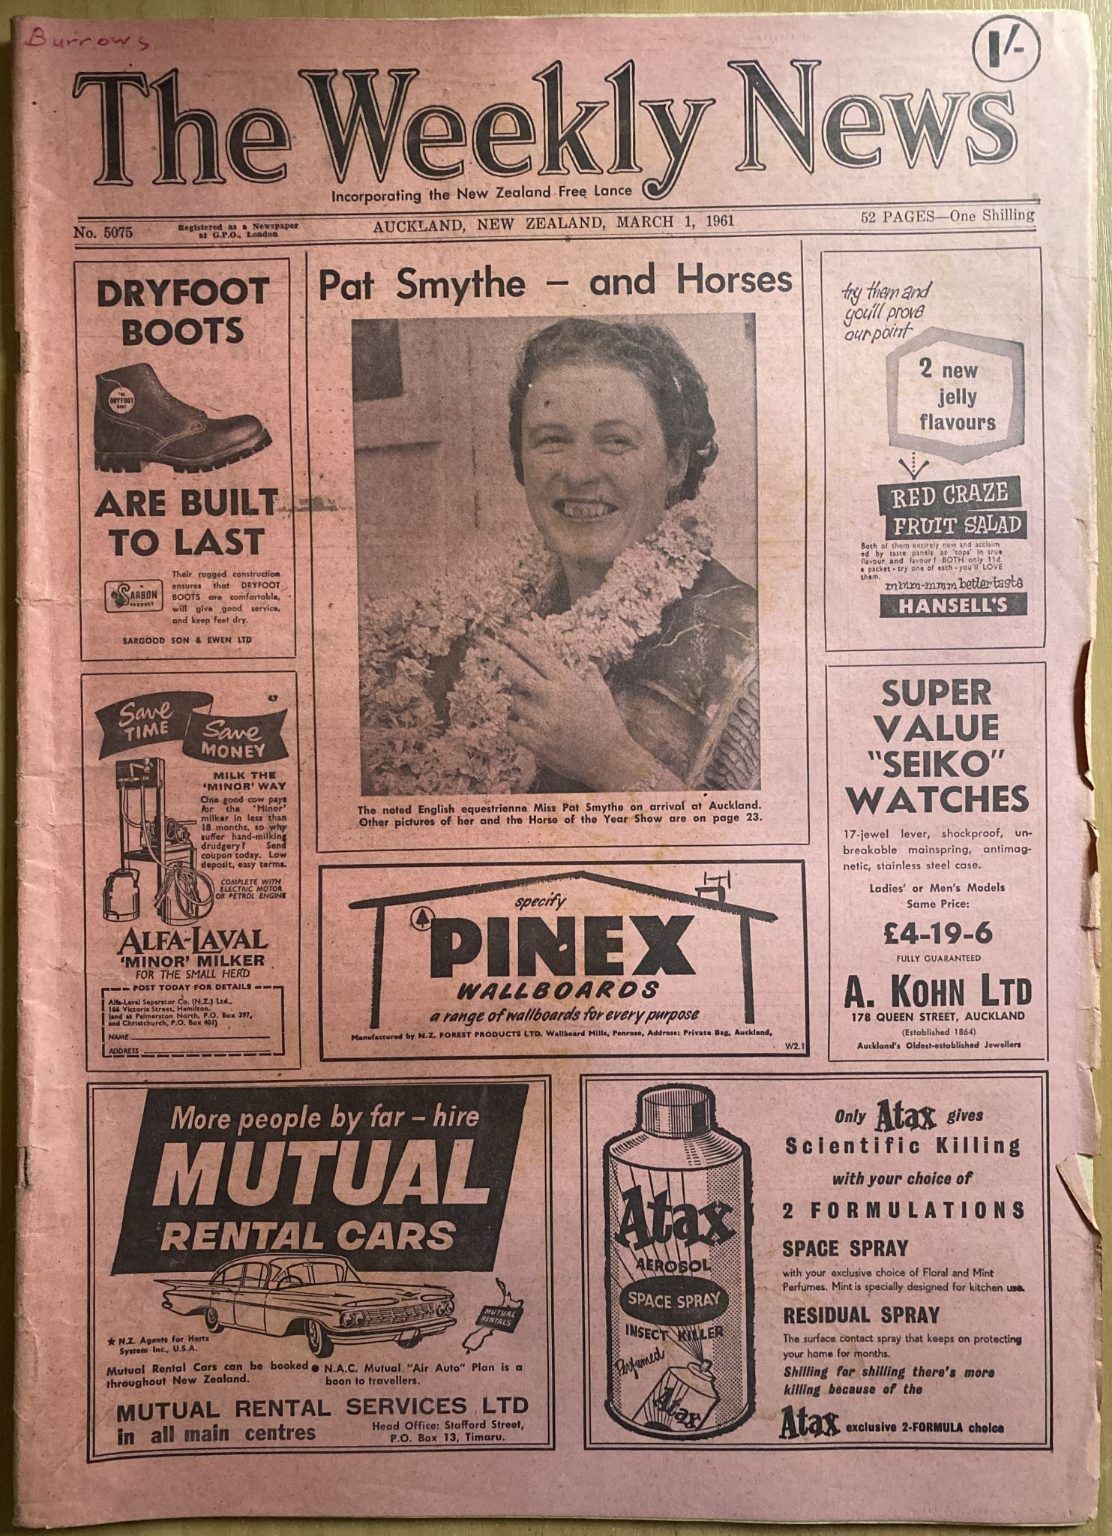 OLD NEWSPAPER: The Weekly News, No. 5075, 1 March 1961